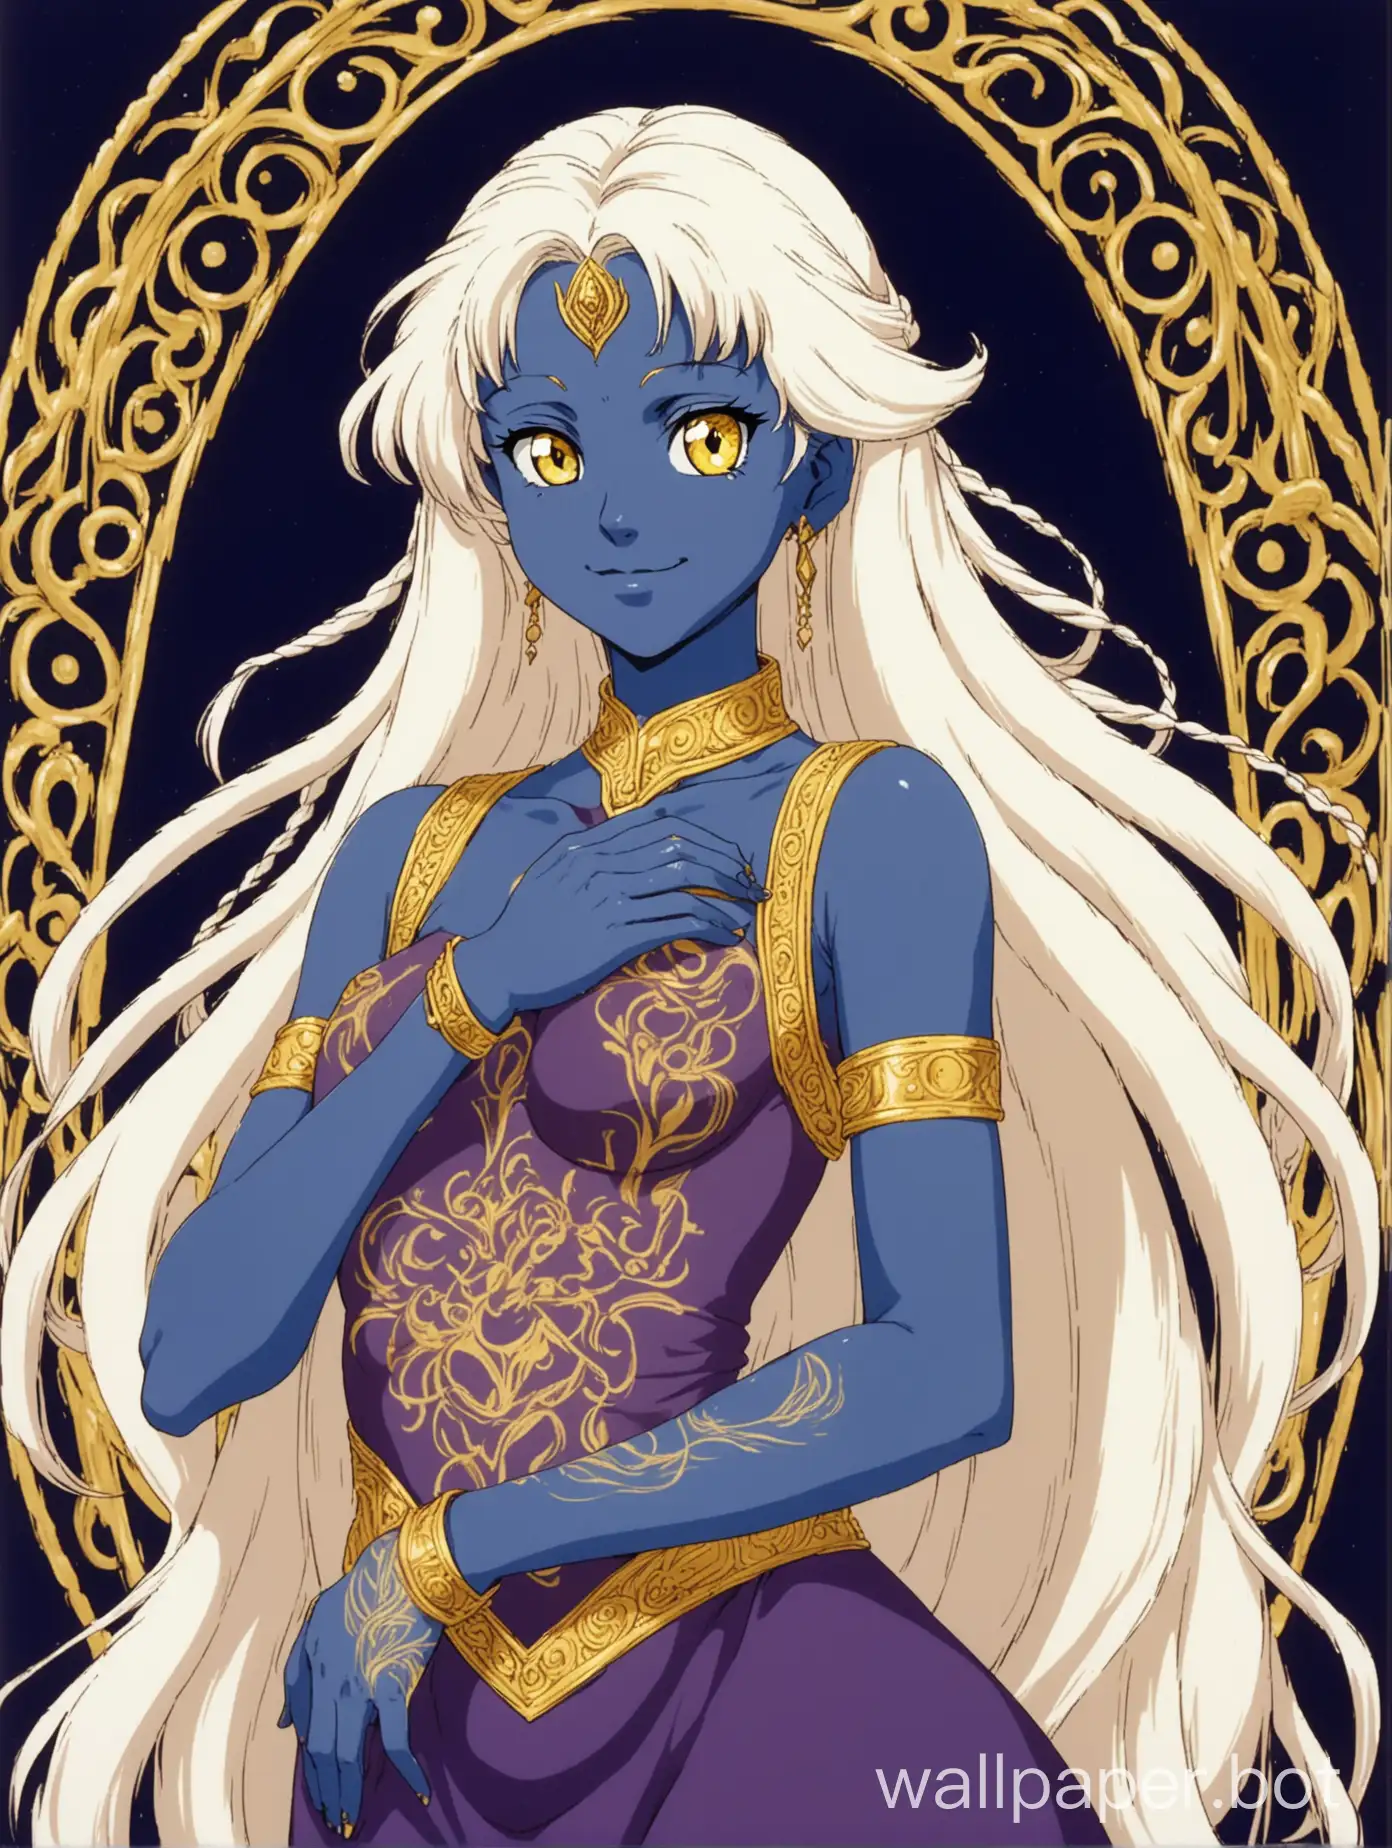 1980s retro anime, full body portrait of an attractive young woman standing regally, she has deep blue skin, indigo blush, yellow eyes, she has long messy loosely-braided white hair, small gold tattoos on her cheeks, mature face, smile, kind expression, sharp thin face, wearing a low-cut sleeveless skintight purple dress, gold tattoos on her arms, affectionate and pretty